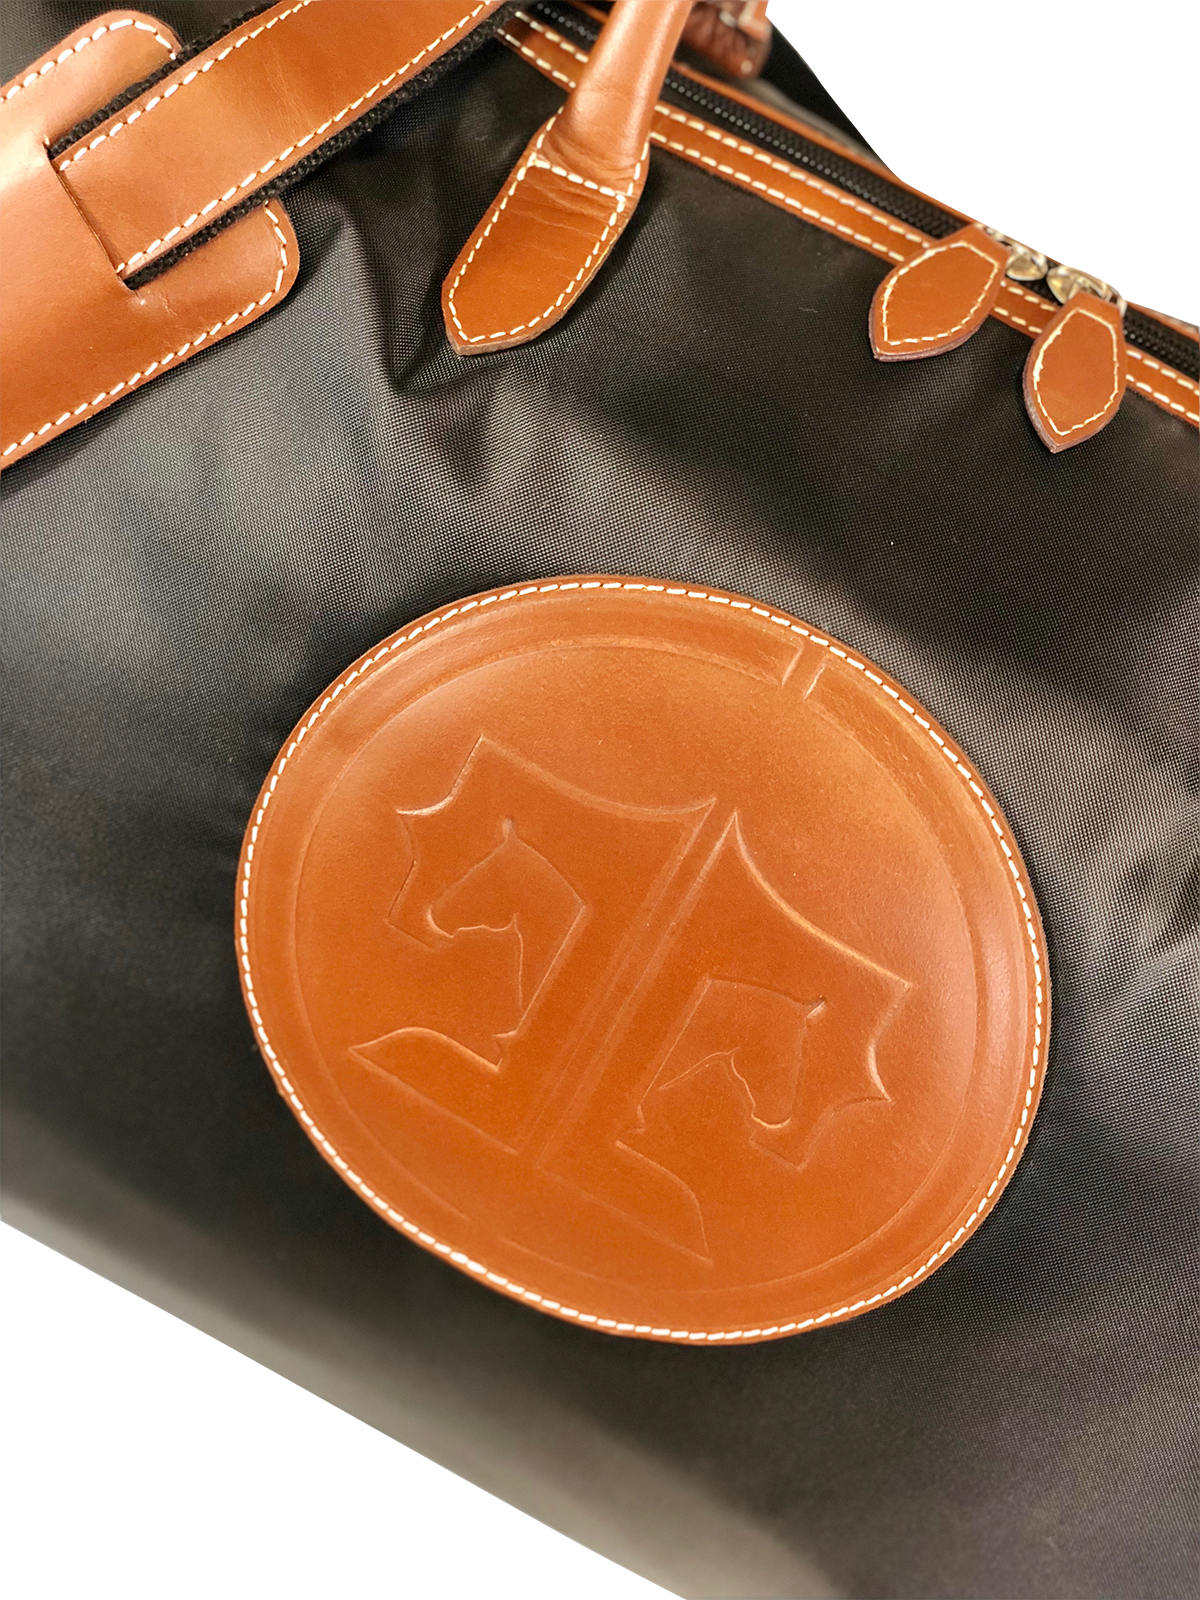 Tucker Tweed Leather Handbags The Tryon Travel Overnight: Signature Collection